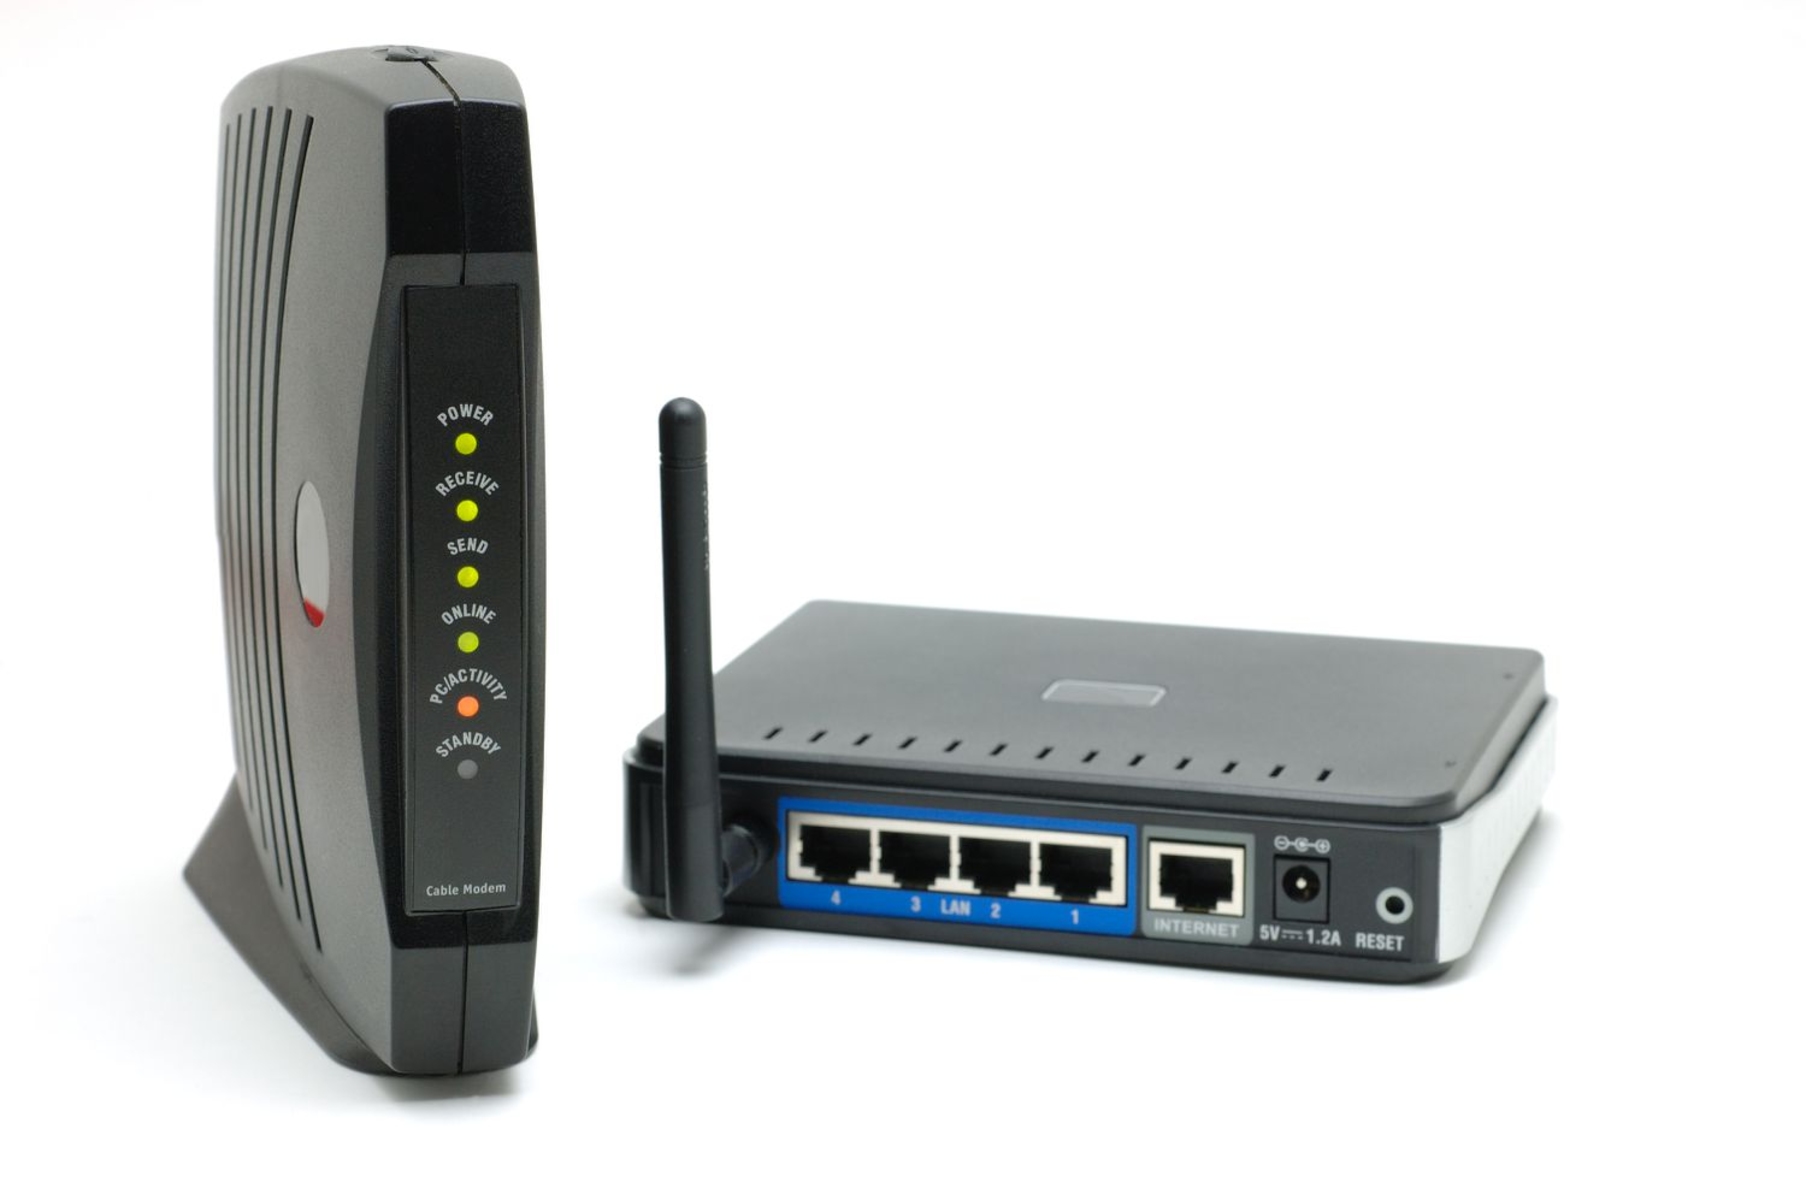 How Do I Connect Wireless Router To Modem